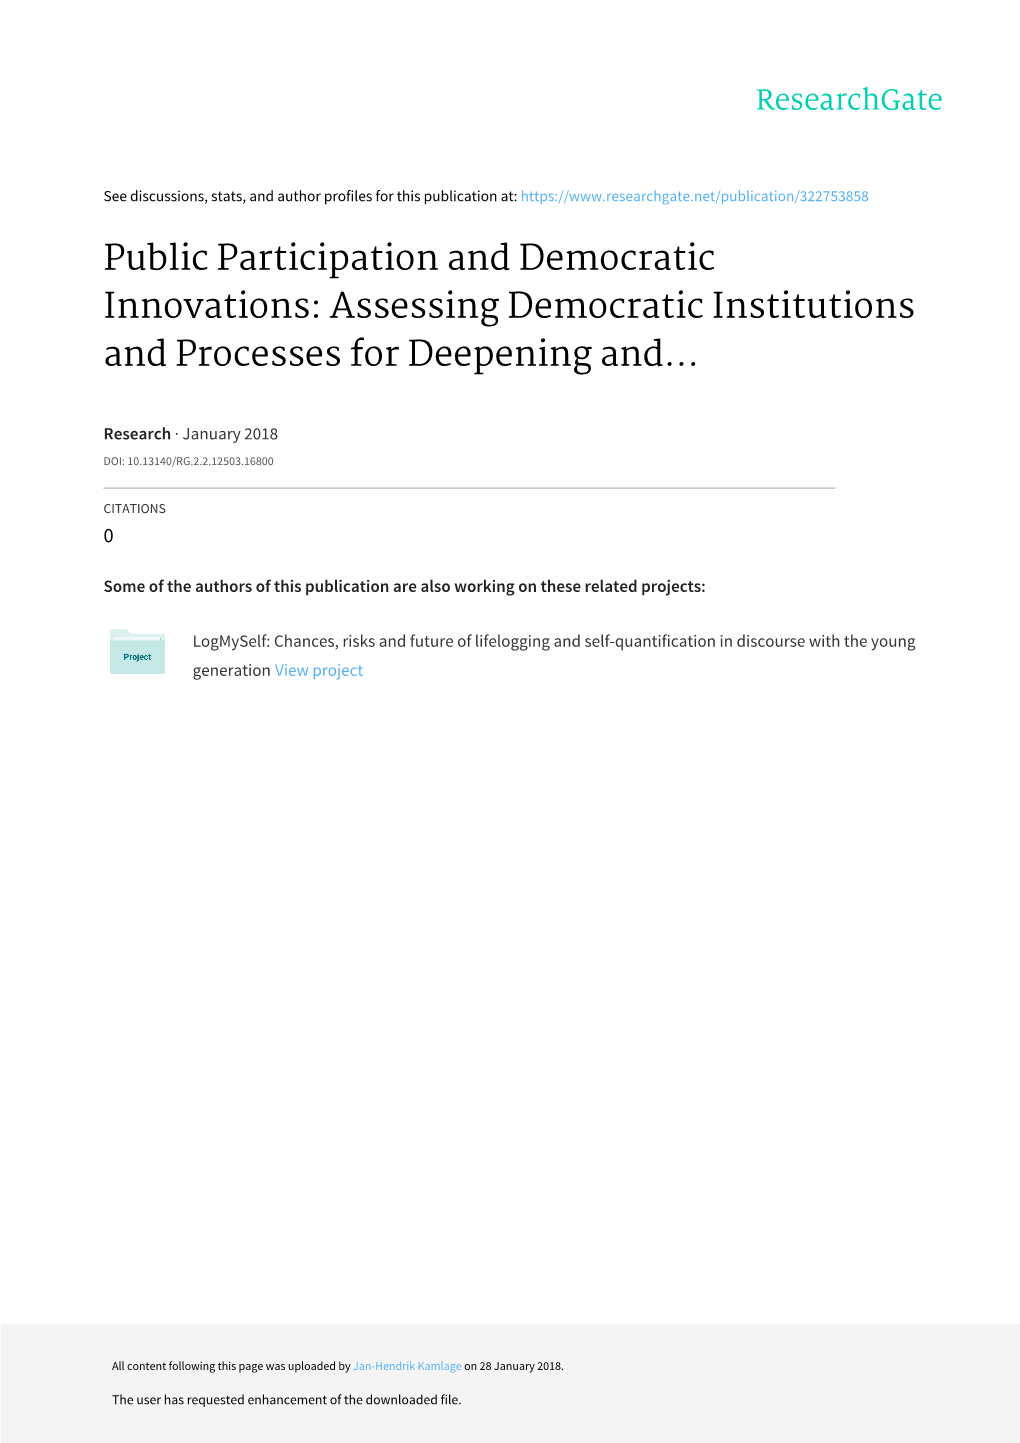 Public Participation and Democratic Innovations: Assessing Democratic Institutions and Processes for Deepening And